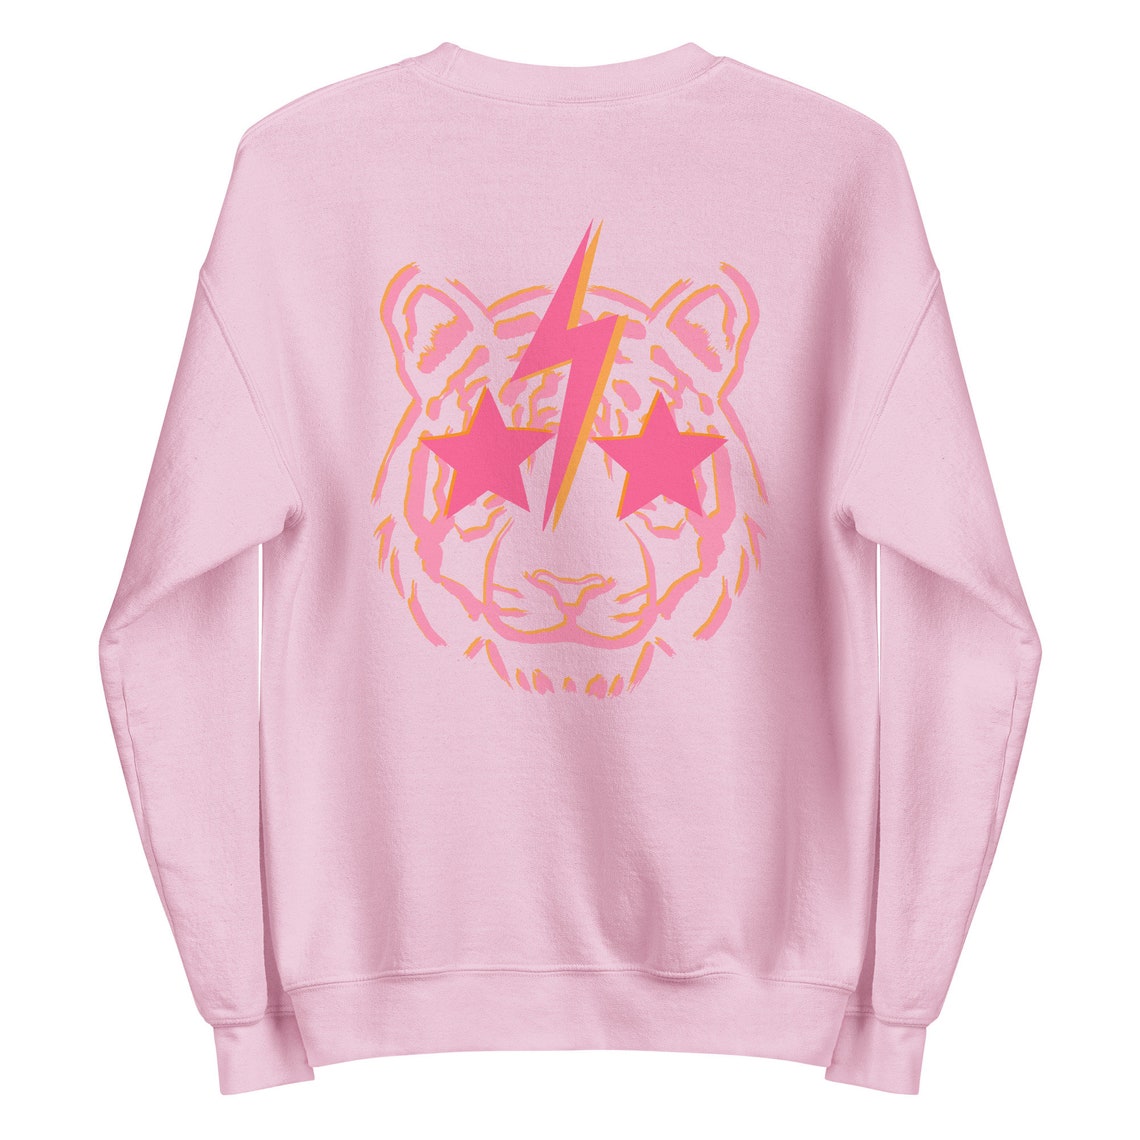 Preppy Aesthetic Lightning Tiger with Stars Crewneck Sweater